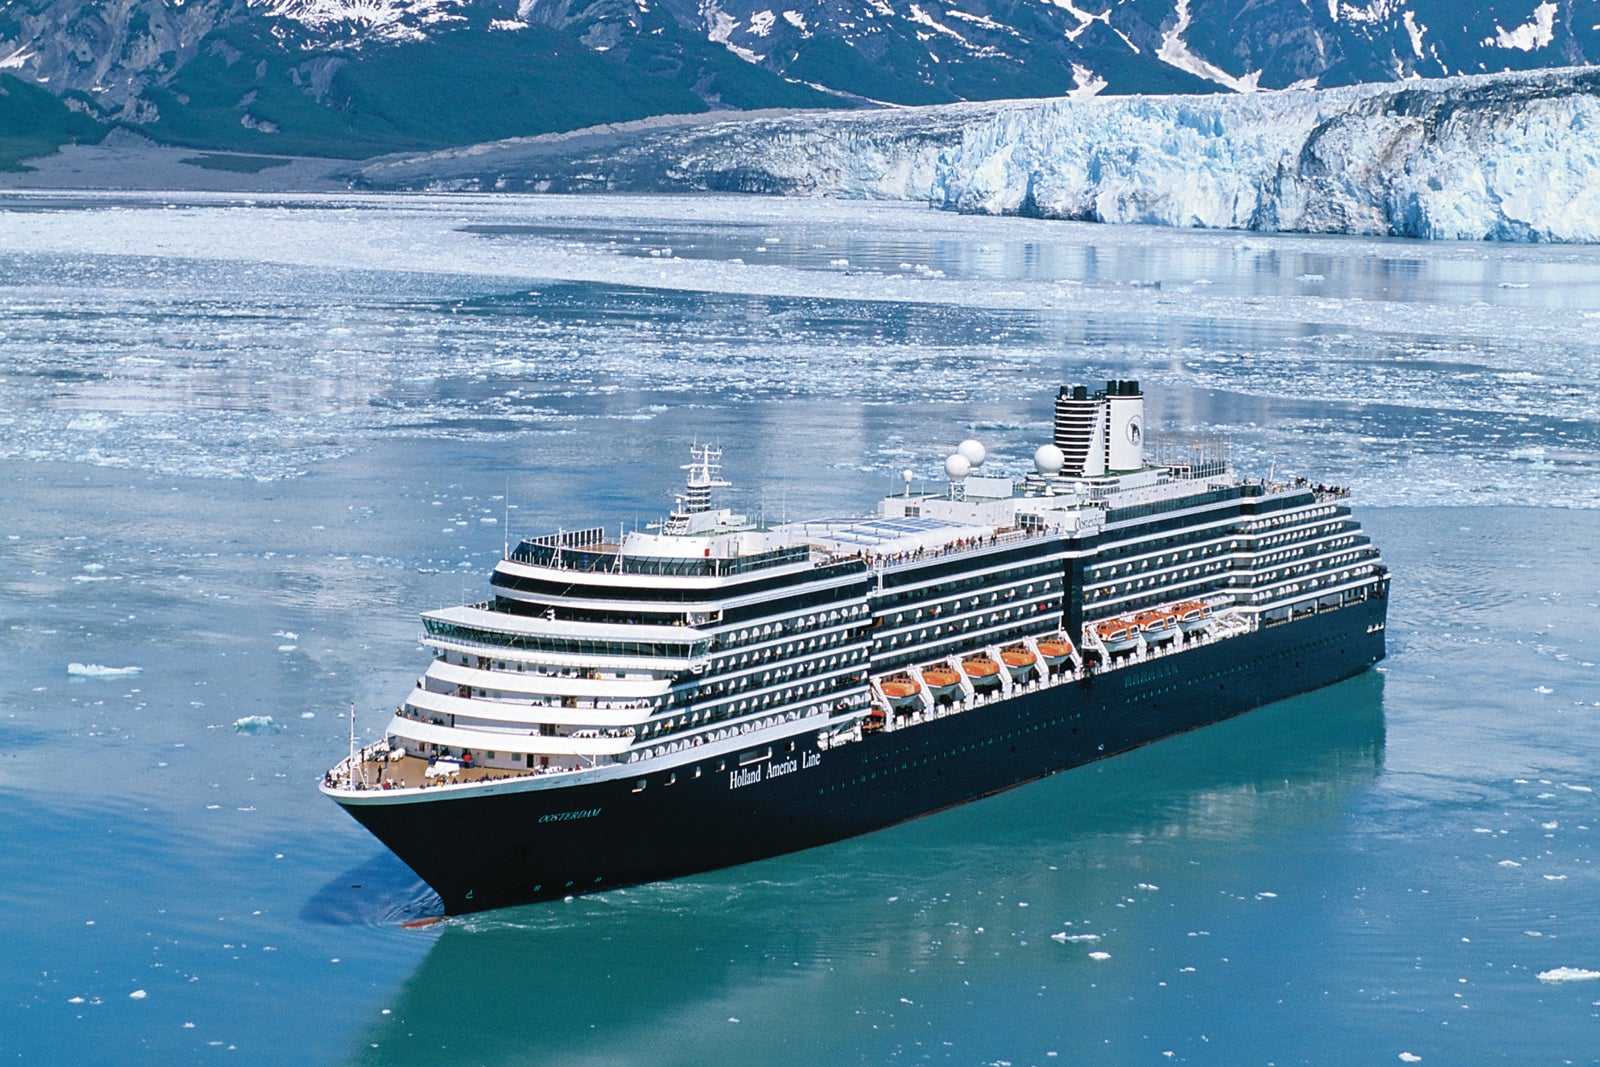 alcohol policy on holland america cruise line